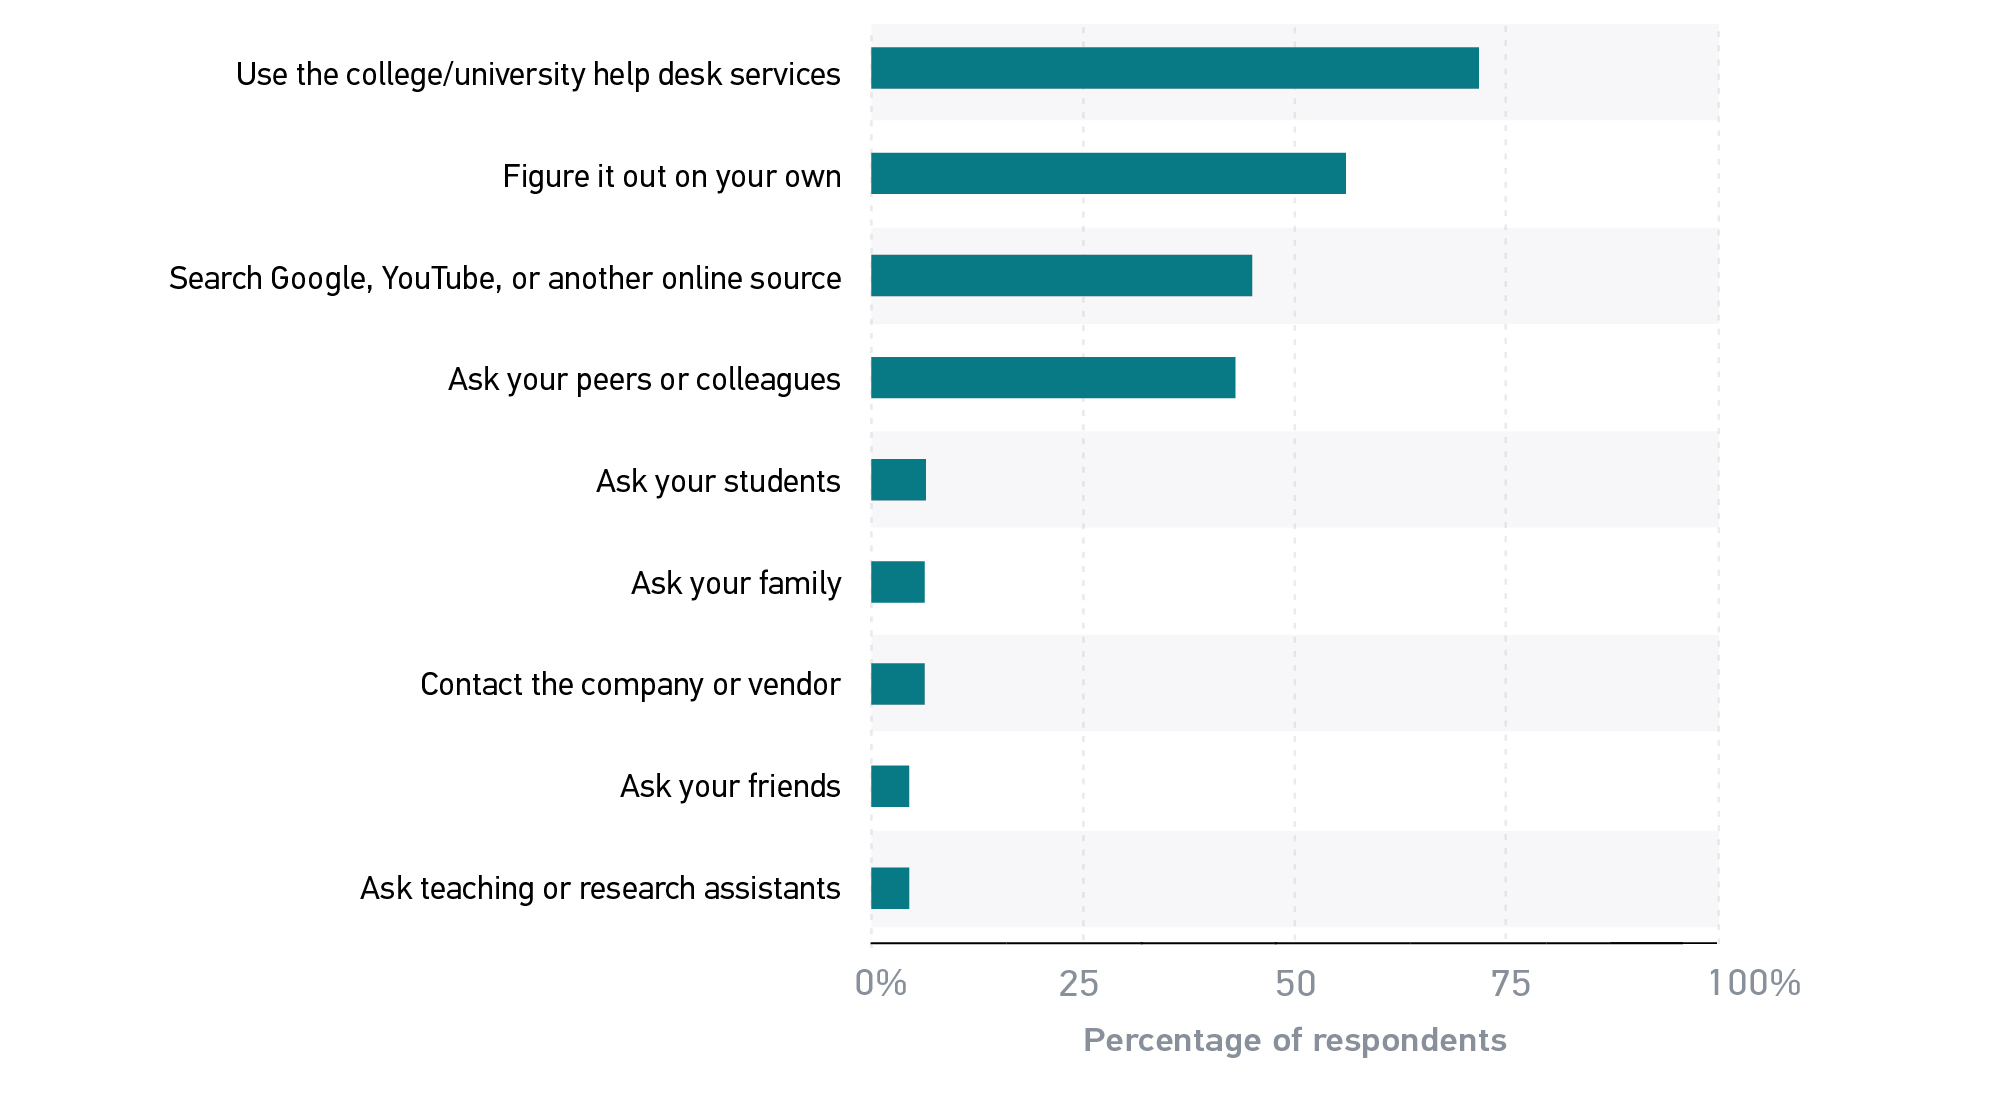 Figure 2: Most faculty seek information from sources that they perceive as having expertise, such as their institution’s IT help desk, their colleagues, or themselves.